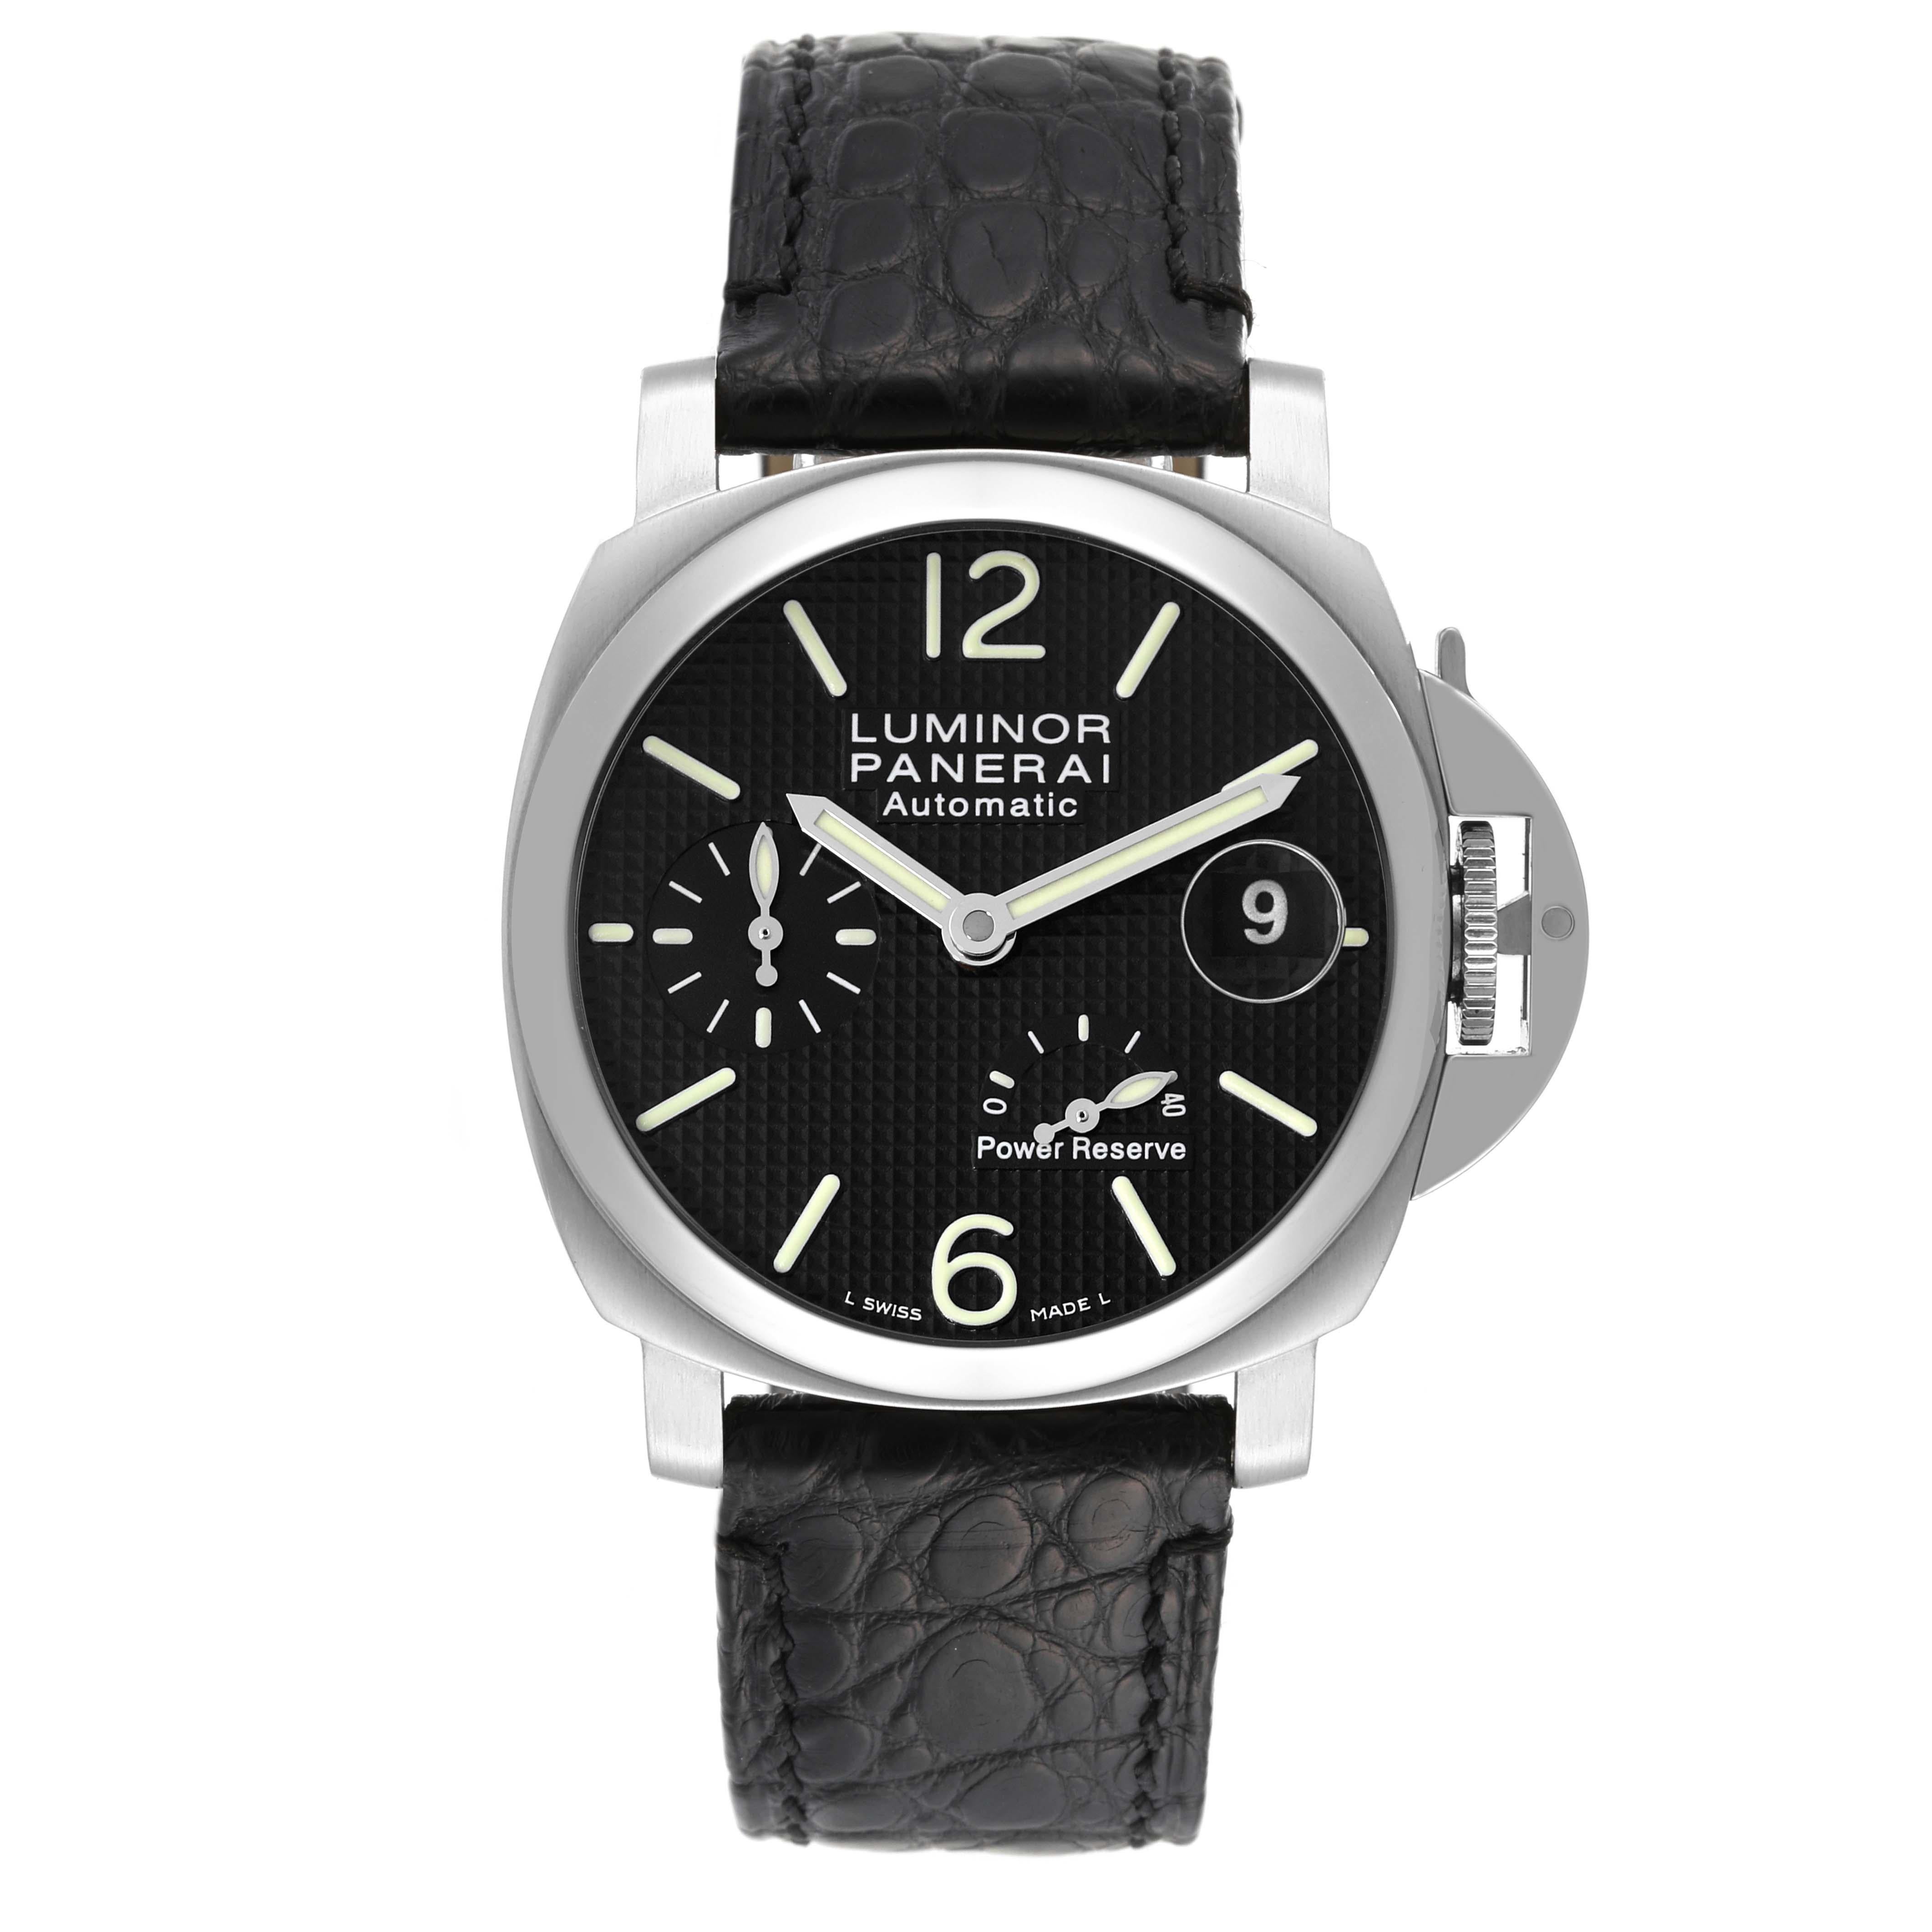 Panerai Luminor Power Reserve 40mm Steel Mens Watch PAM00241 Box Papers. Automatic self-winding movement. Two part cushion shaped stainless steel case 40.0 mm in diameter. Polished Panerai patented crown protector. Stainless steel sloped bezel.